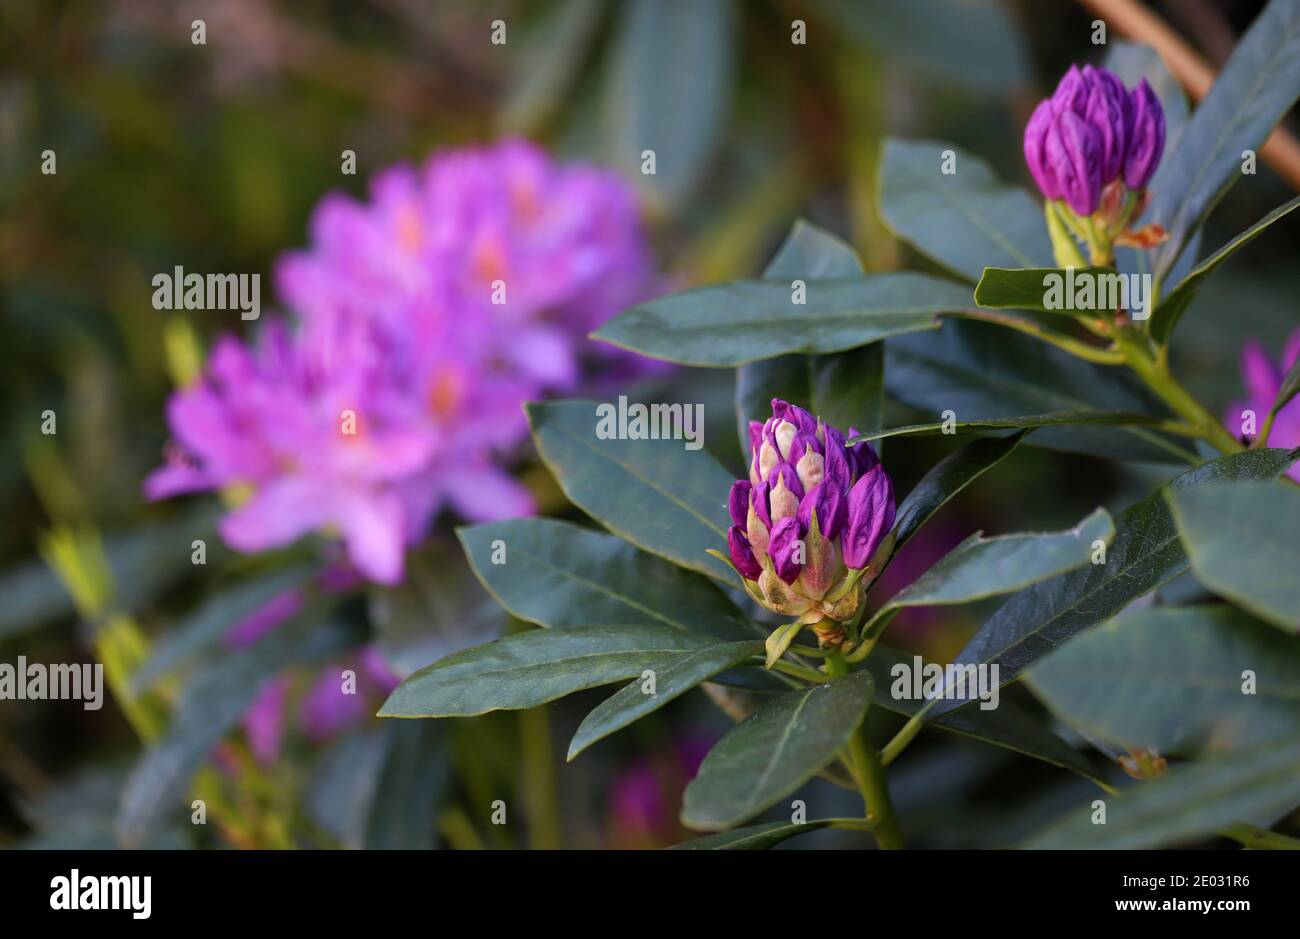 Rhododendron flowers fill the background with pink colour while in the foreground buds begin to unfurl and bloom. Stock Photo